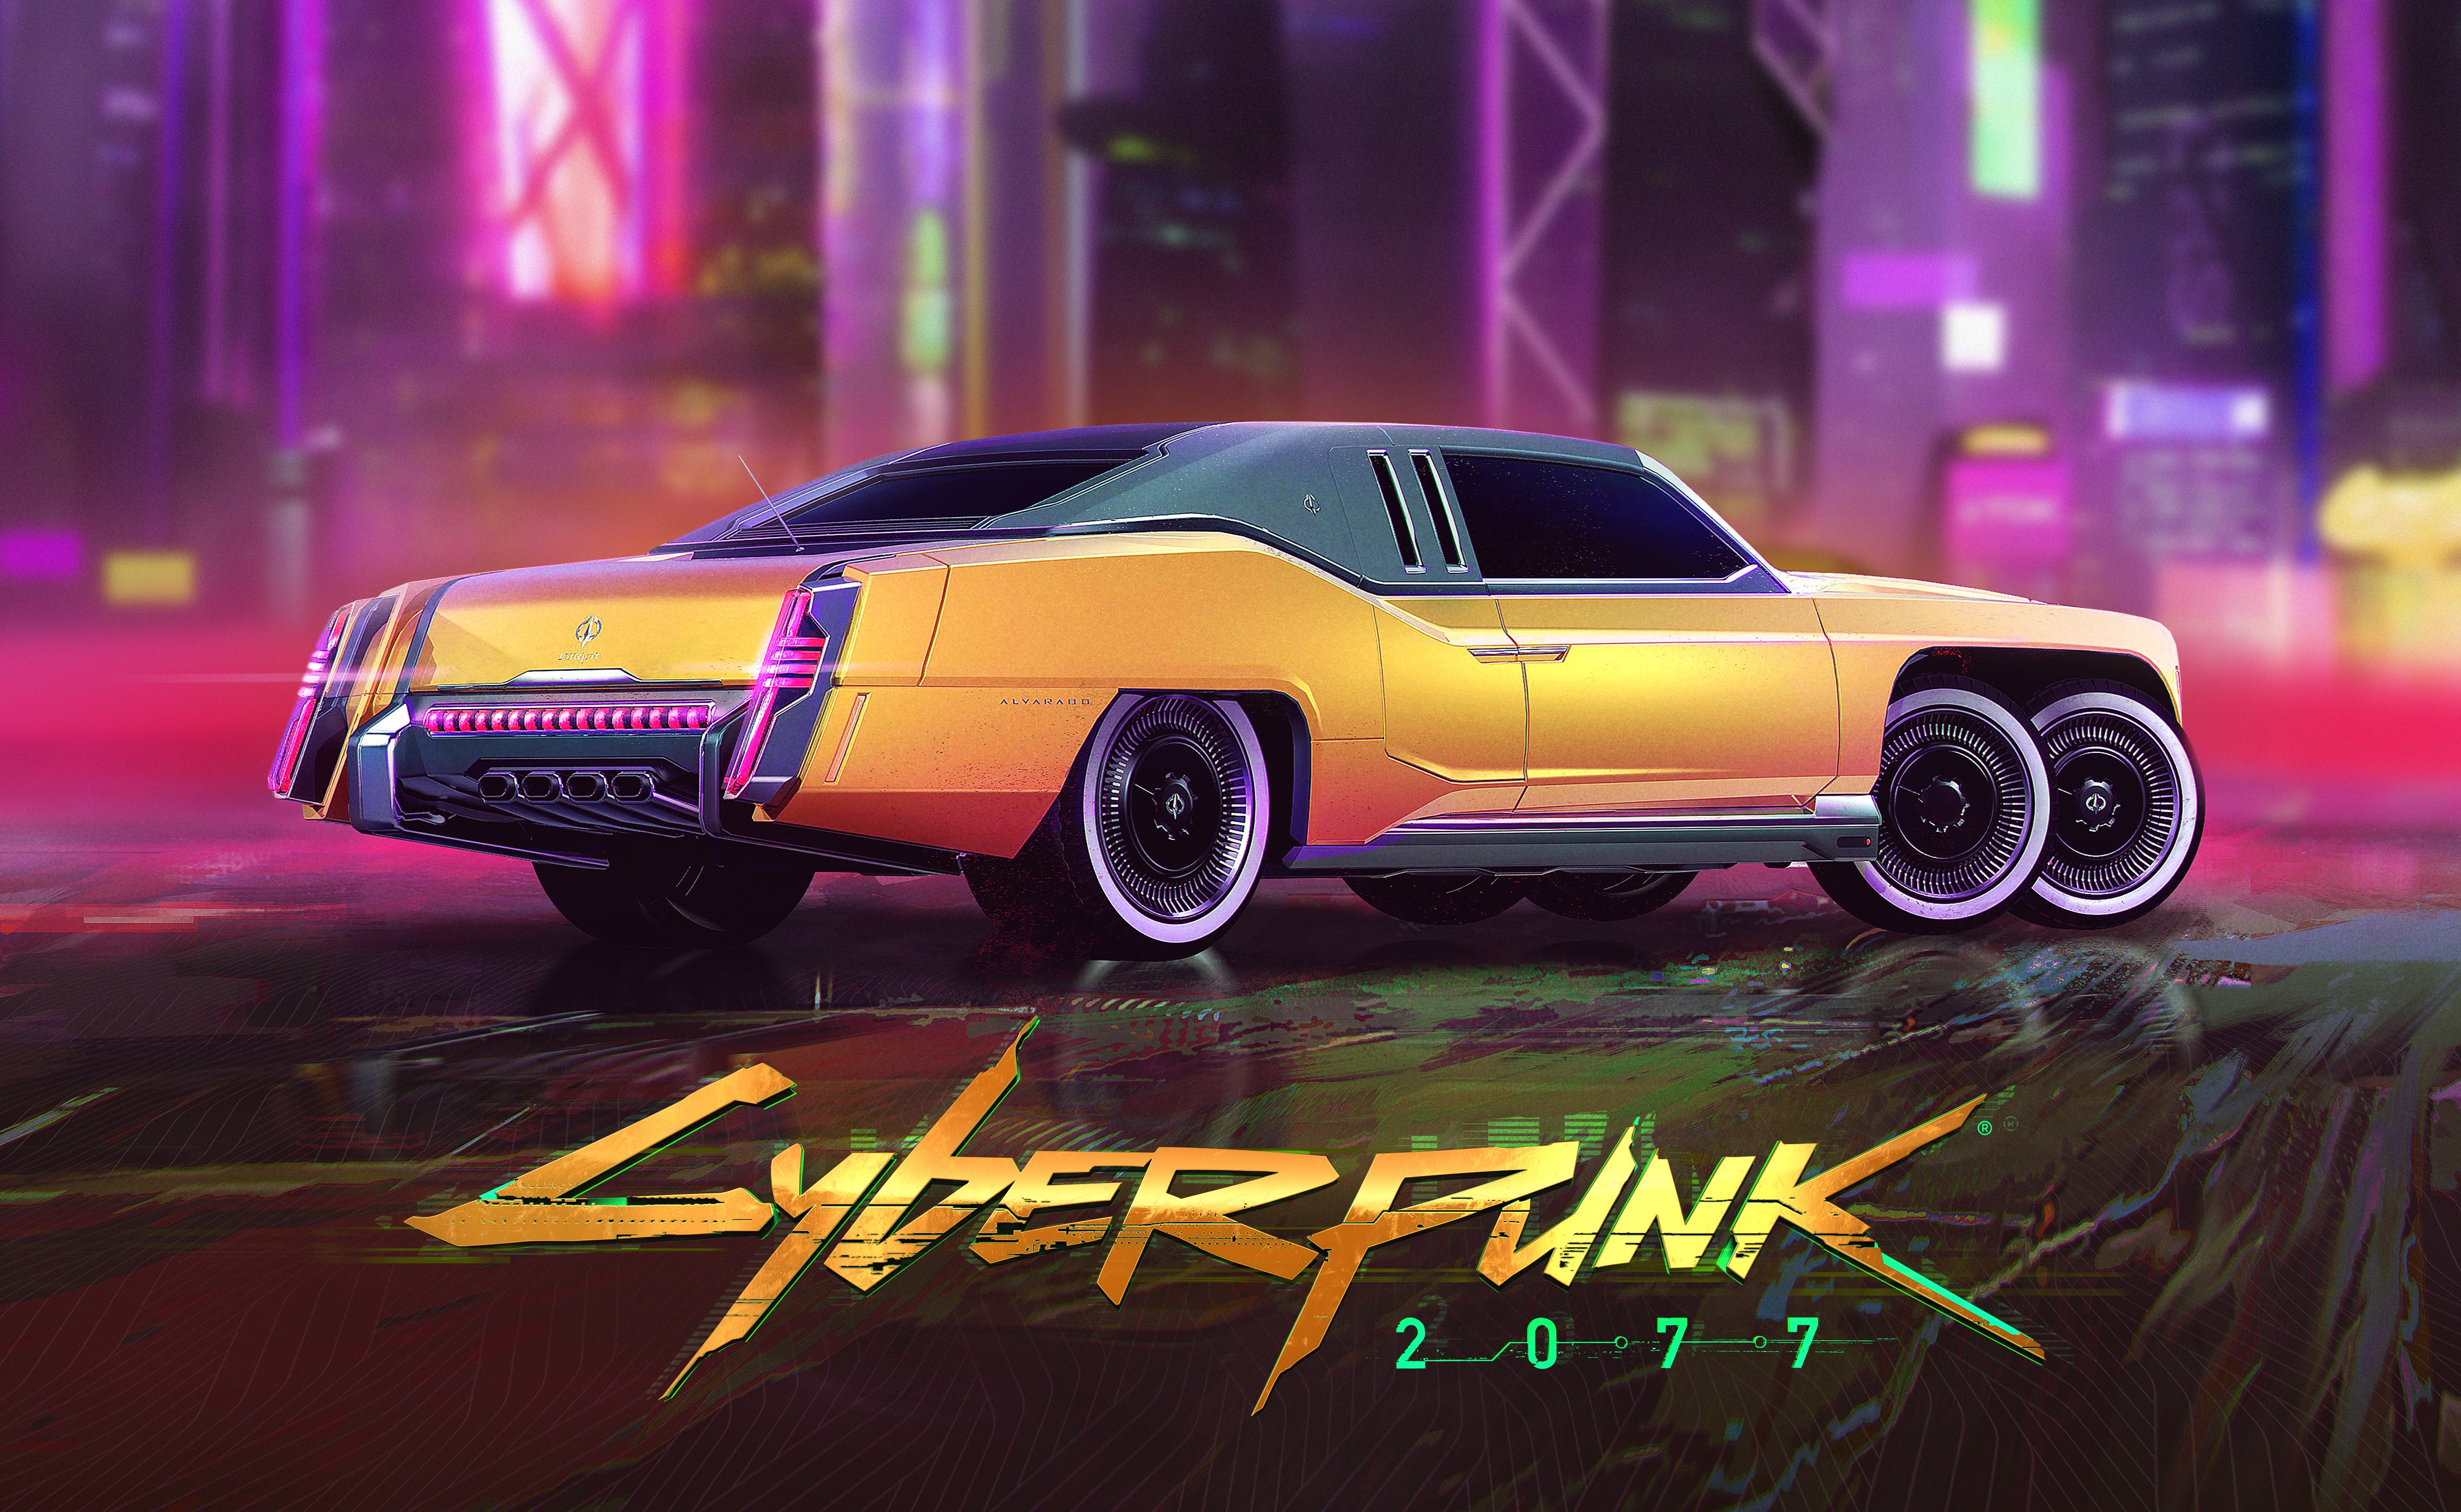 Cyberpunk 2077 Car 4k Wallpaper,HD Games Wallpapers,4k Wallpapers,Images, Backgrounds,Photos and Pictures